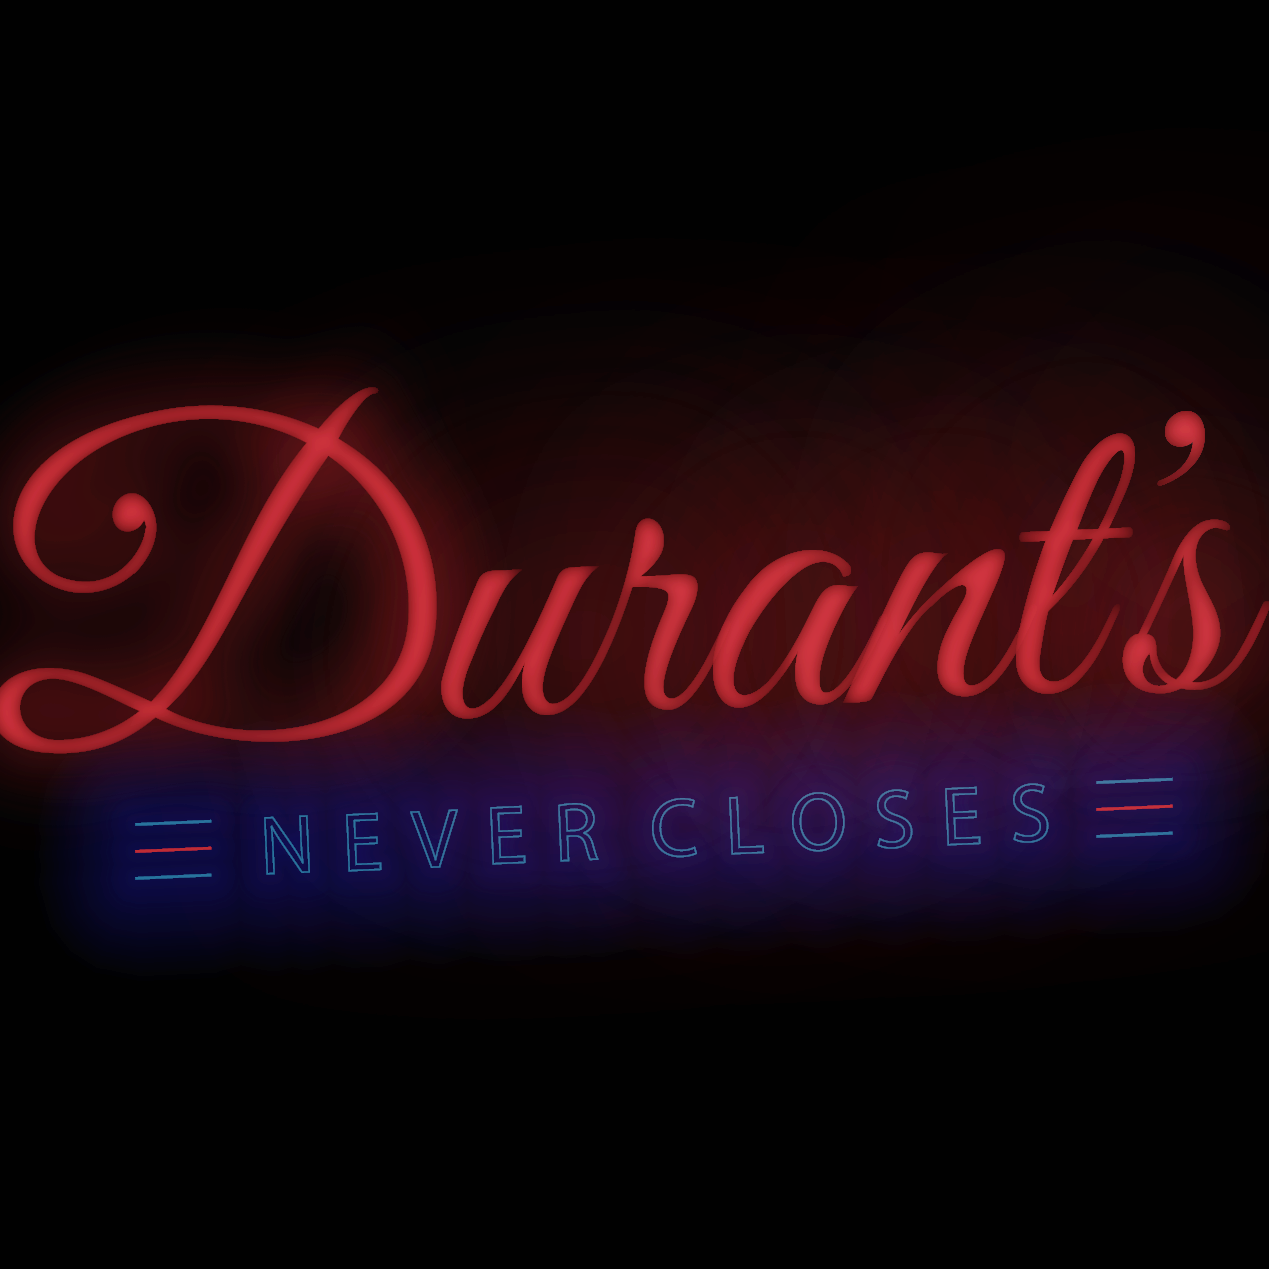 Our feature film Durant's Never Closes, stars Tom Sizemore and Pam Grier. Please donate to our Kickstarter! Visit our website for more info.